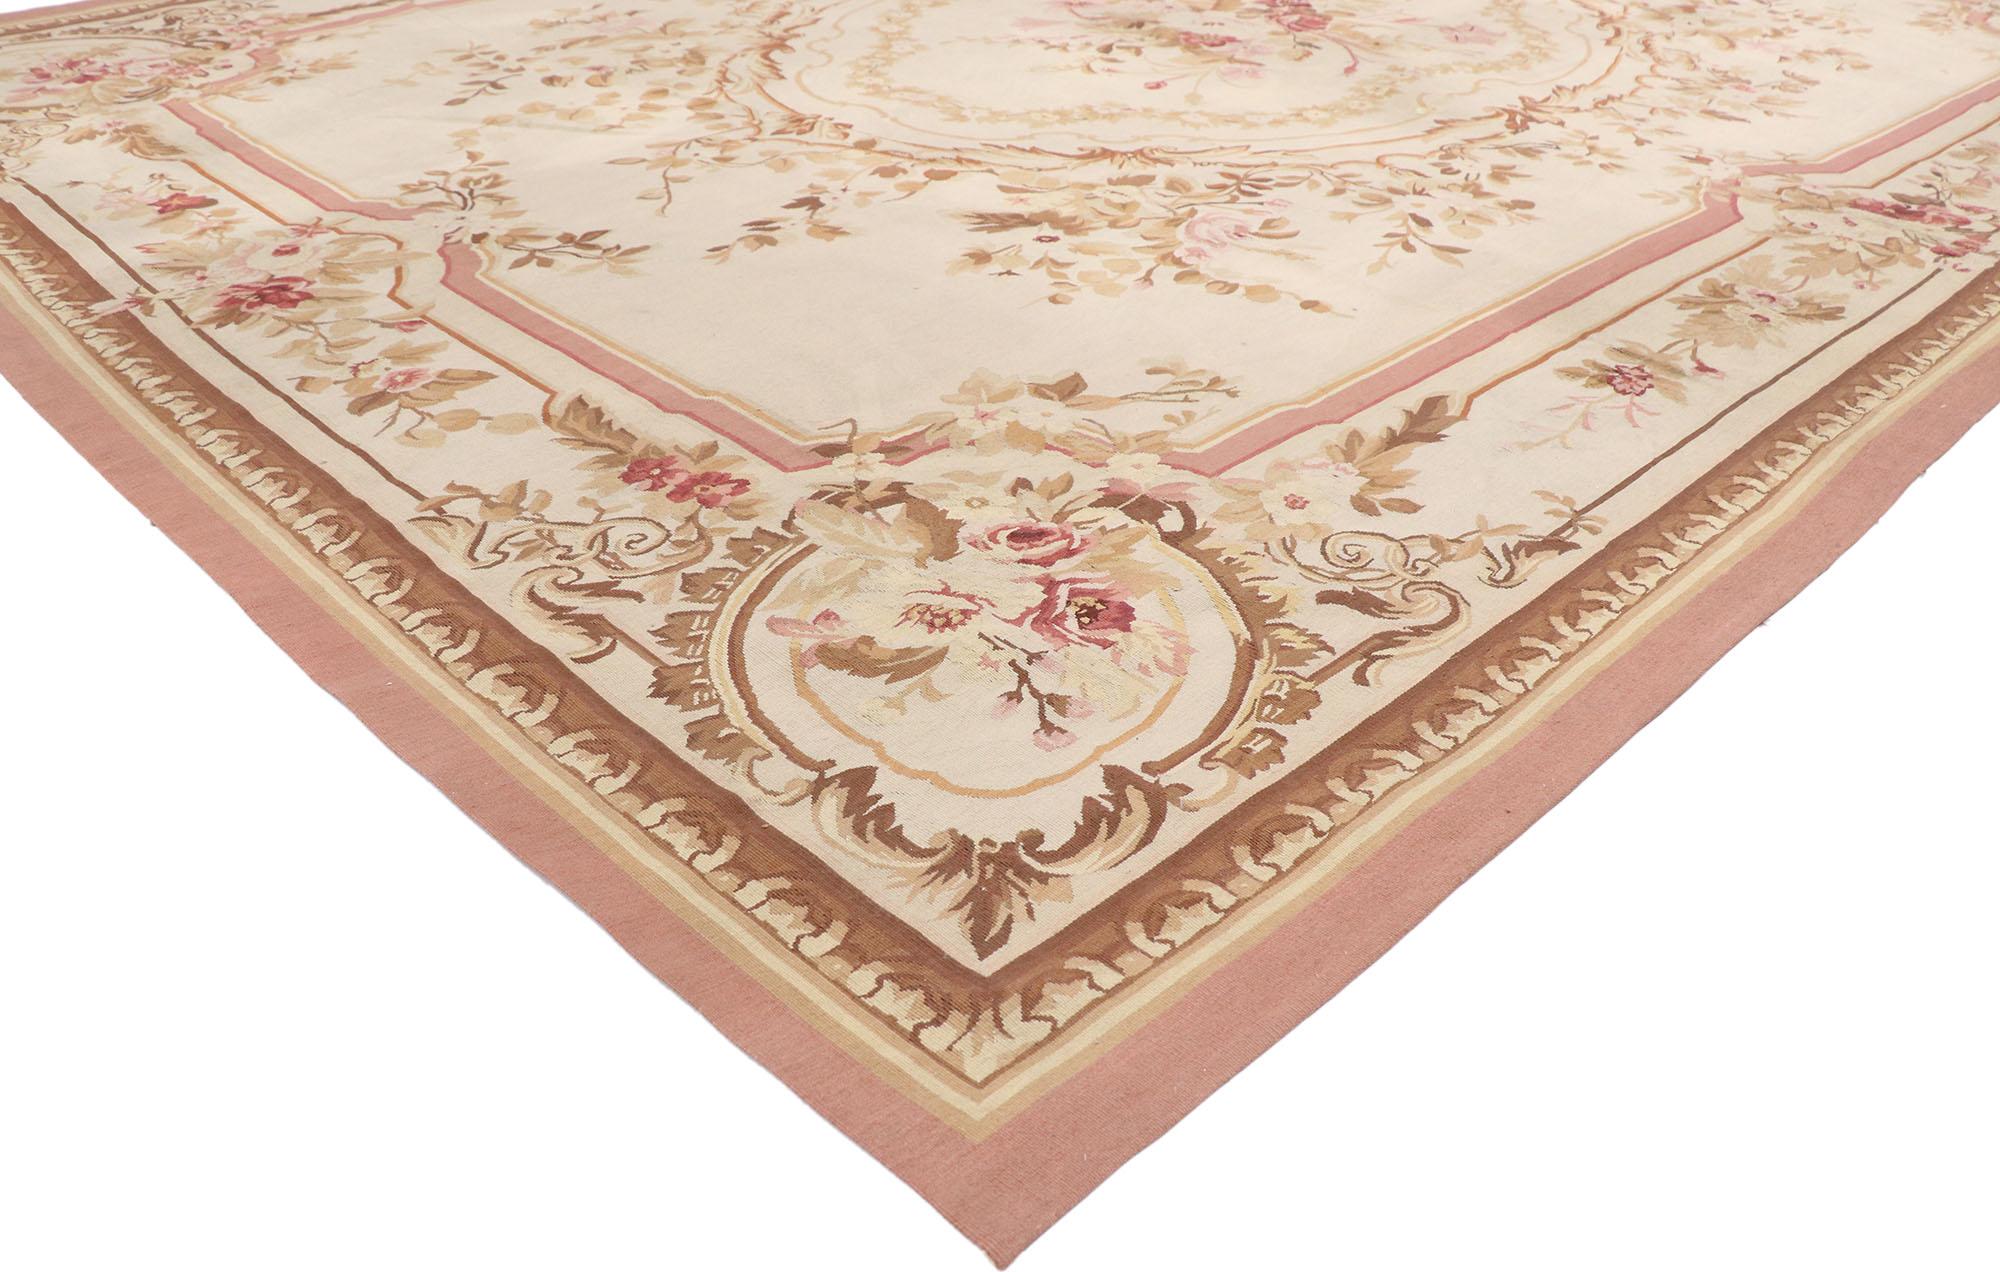 77645 Vintage French Aubusson rug with romantic rococo style. Flourishing in technique and trend from the middle of the 17th century for nearly two hundred years, until the early 20th century, this hand-woven wool vintage French Aubusson rug is a